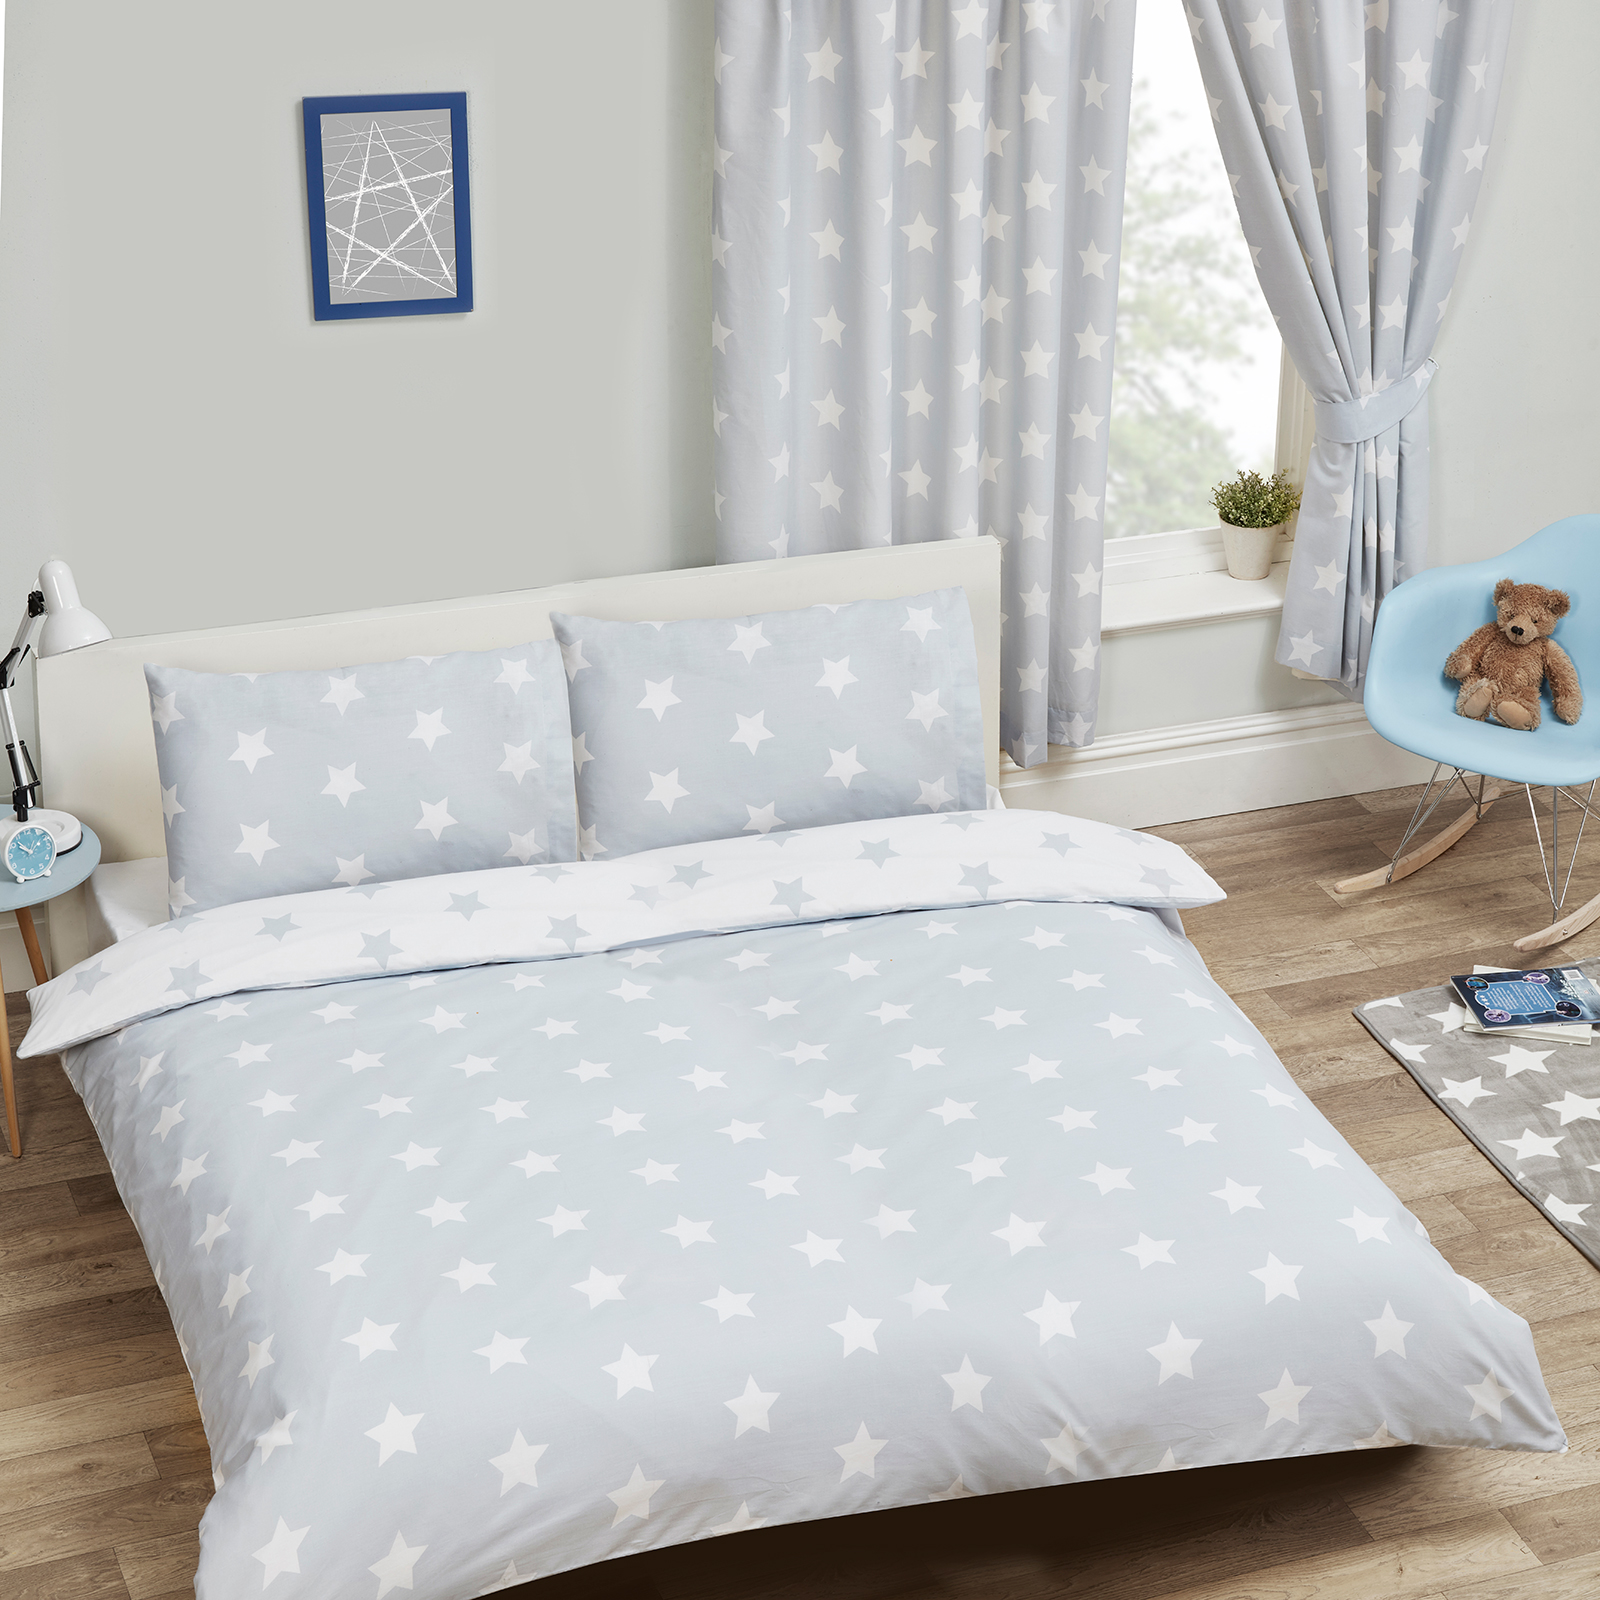 Star Themed Bedroom Ideas For Babies, Toddlers And Children